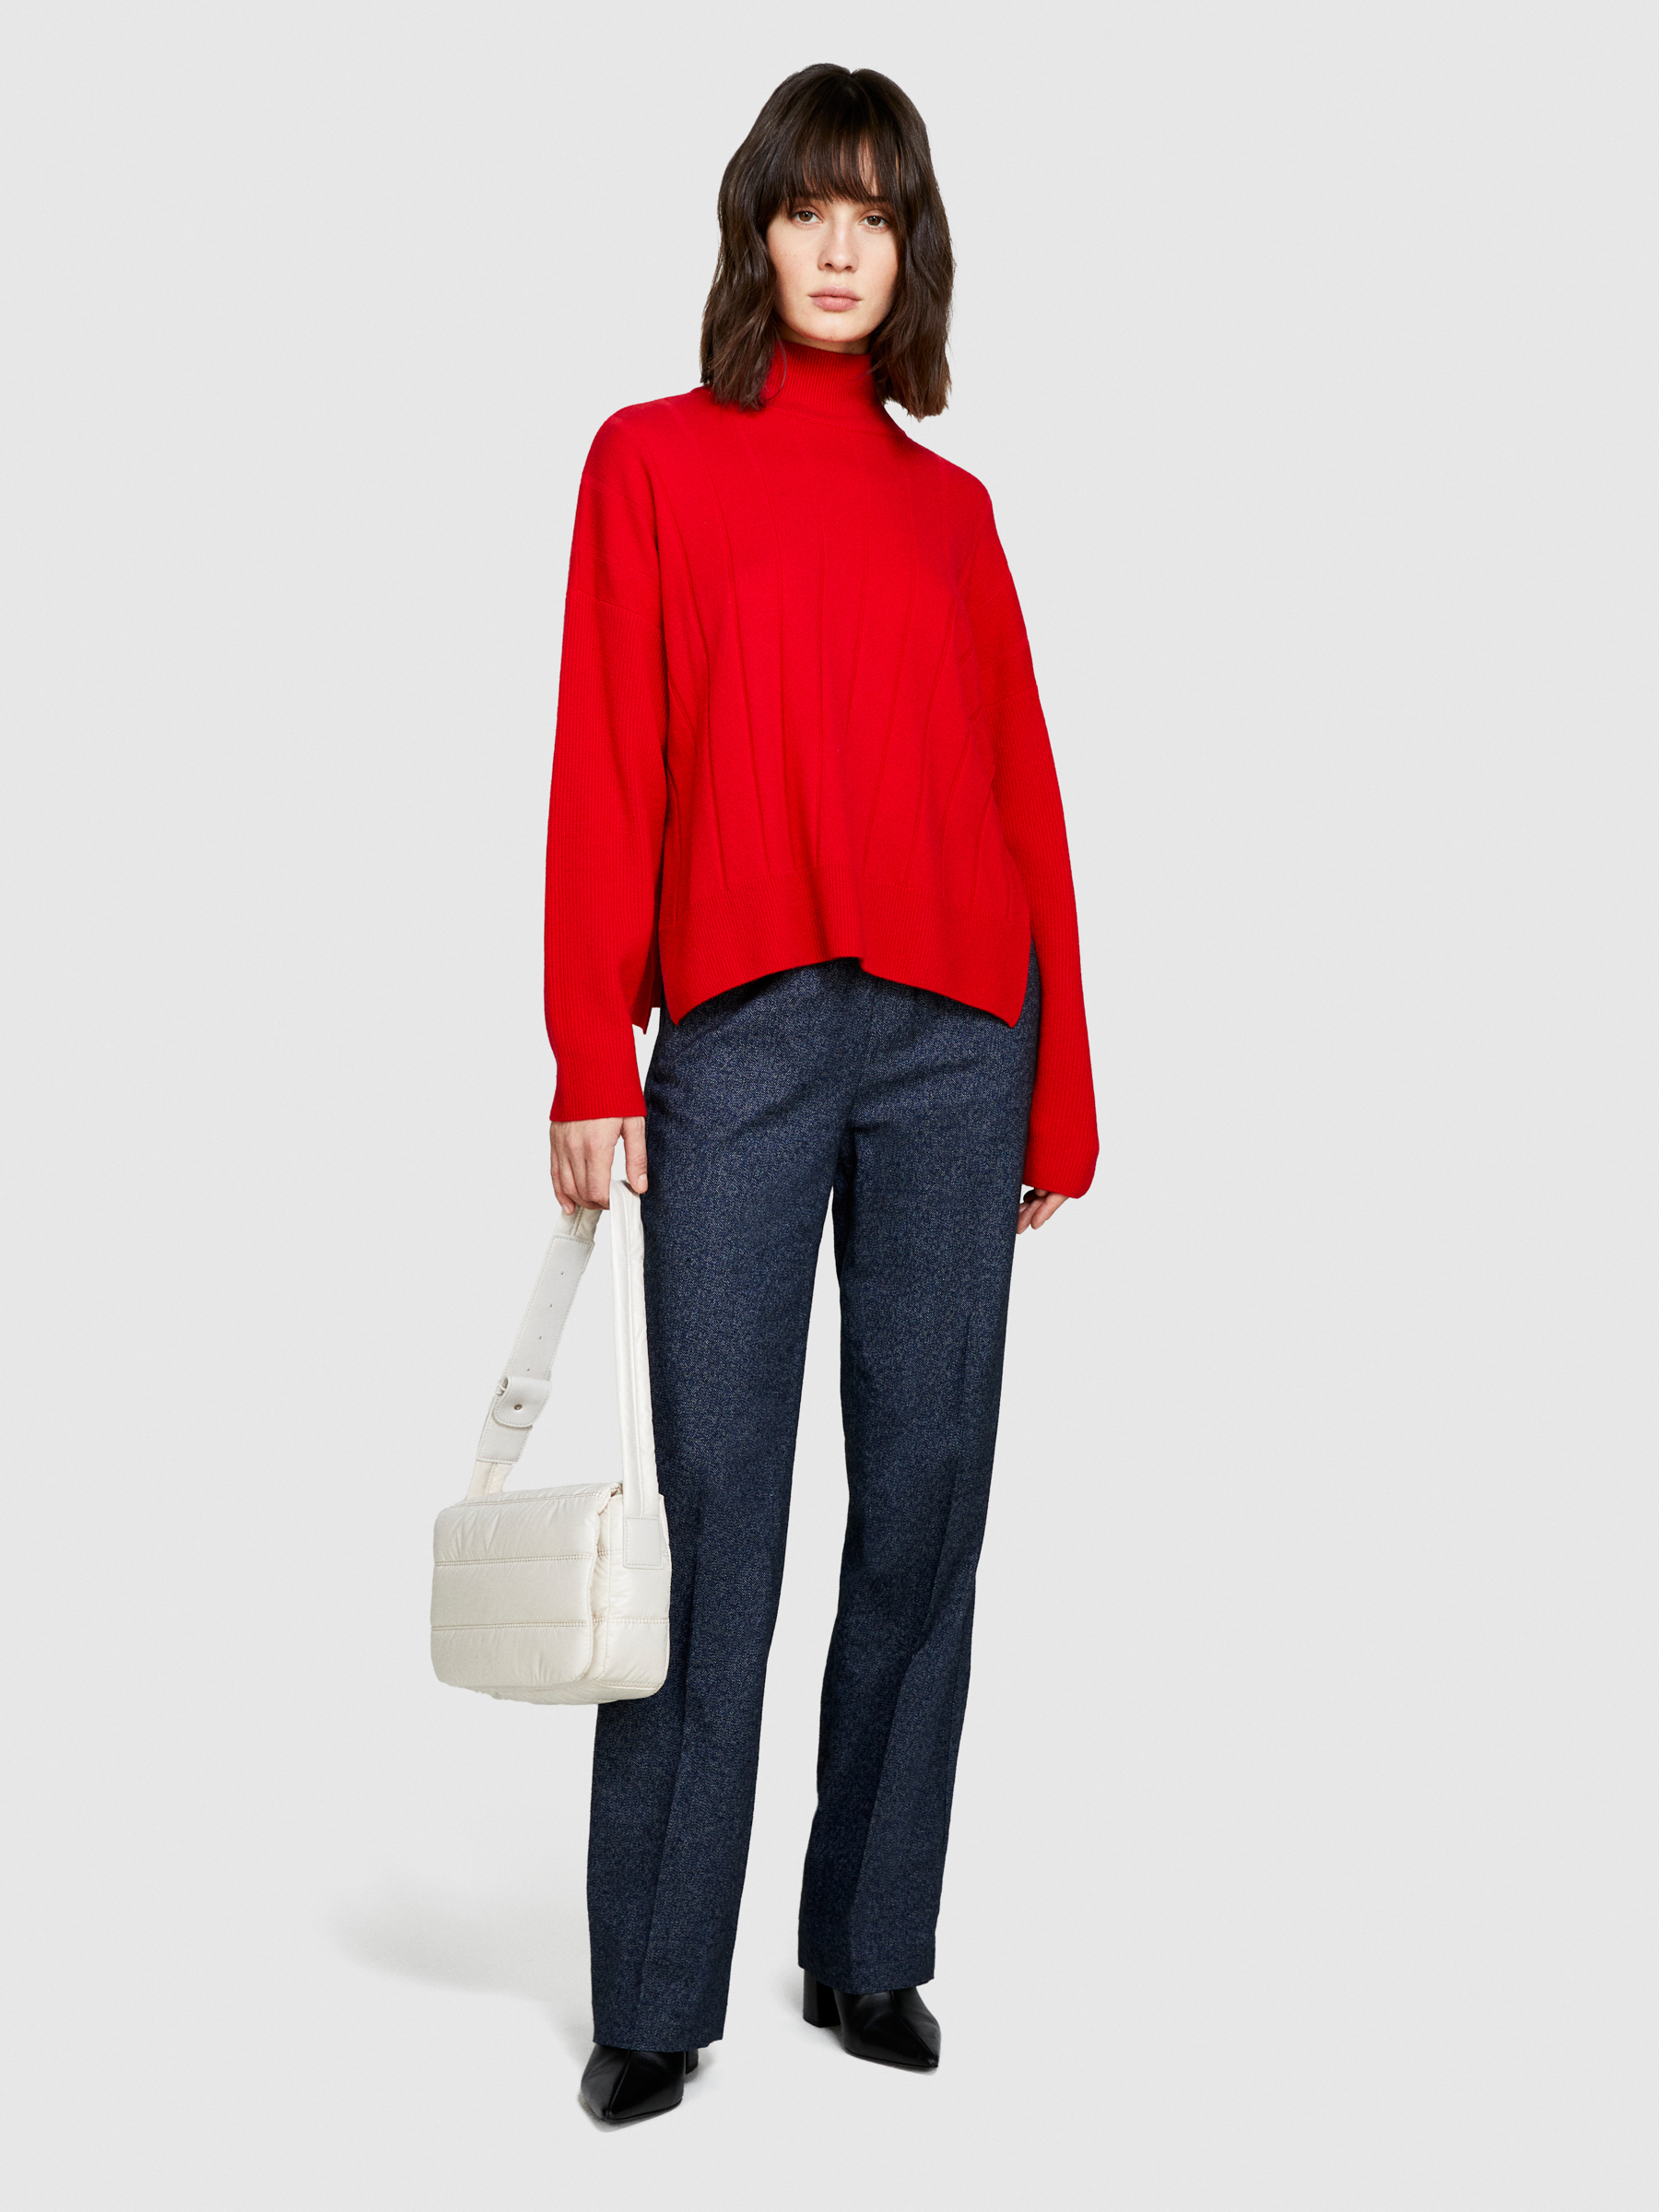 Sisley - Boxy Fit Turtleneck Sweater, Woman, Red, Size: S